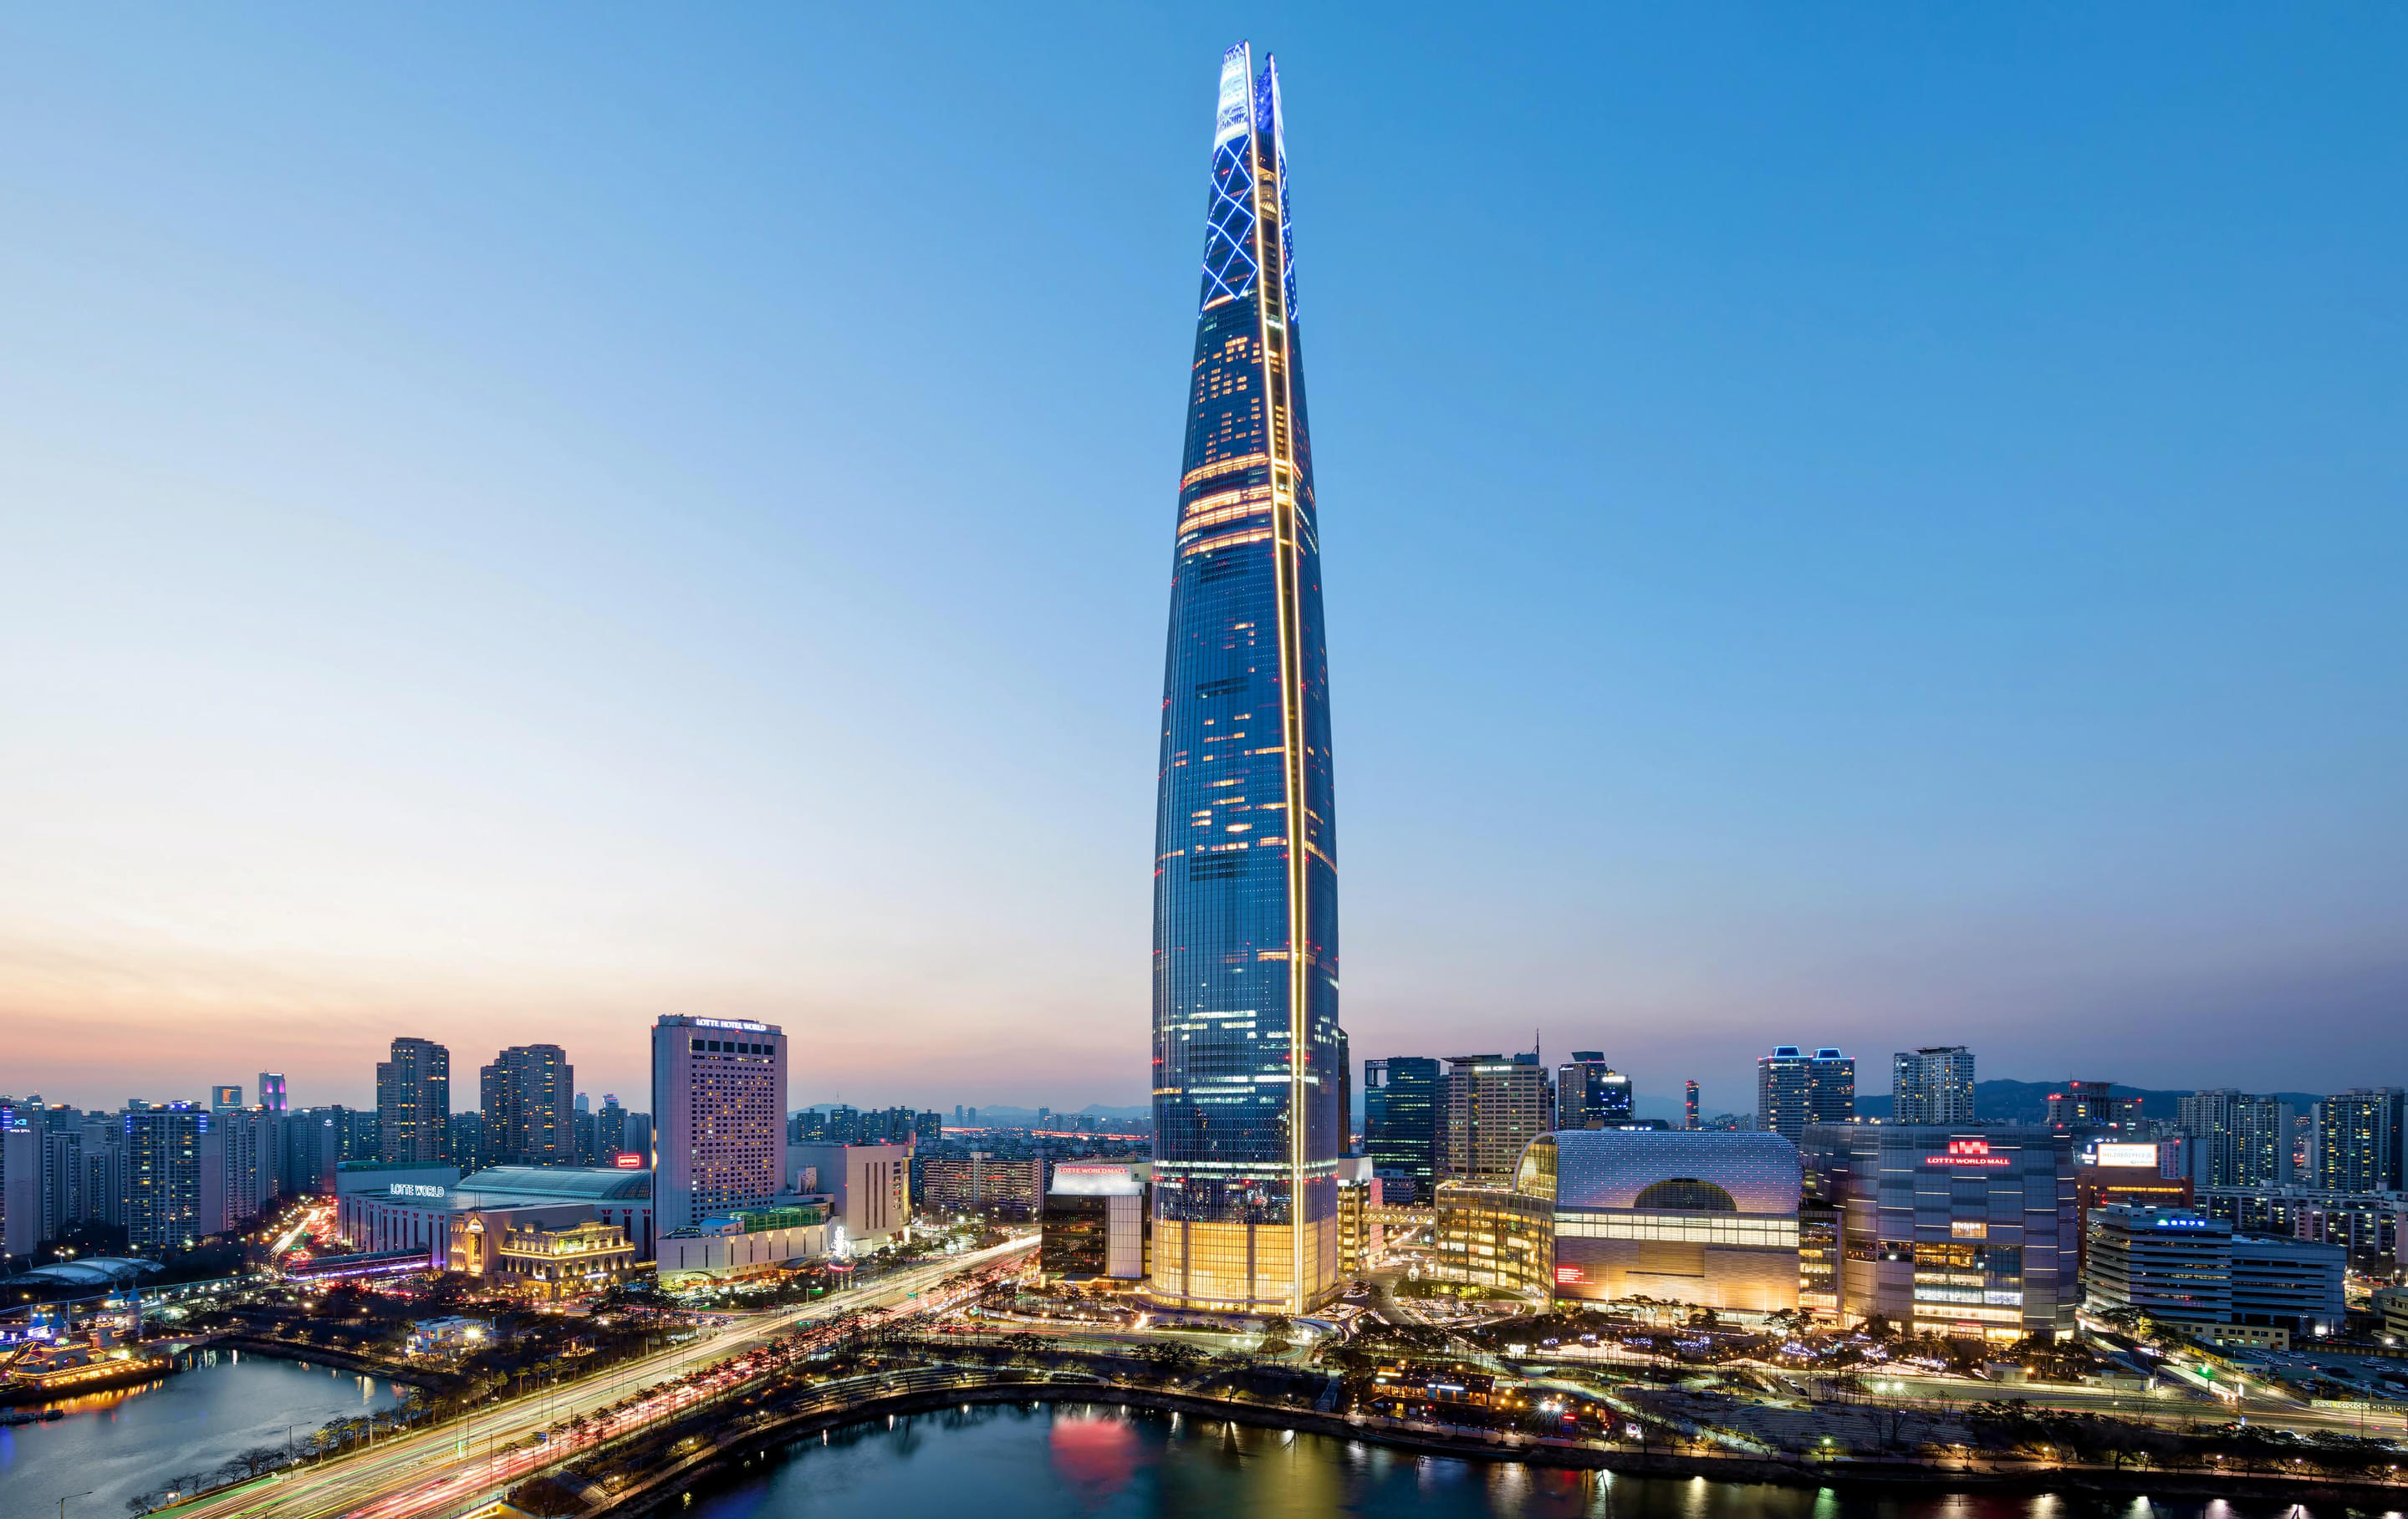 Lotte World Tower Overview